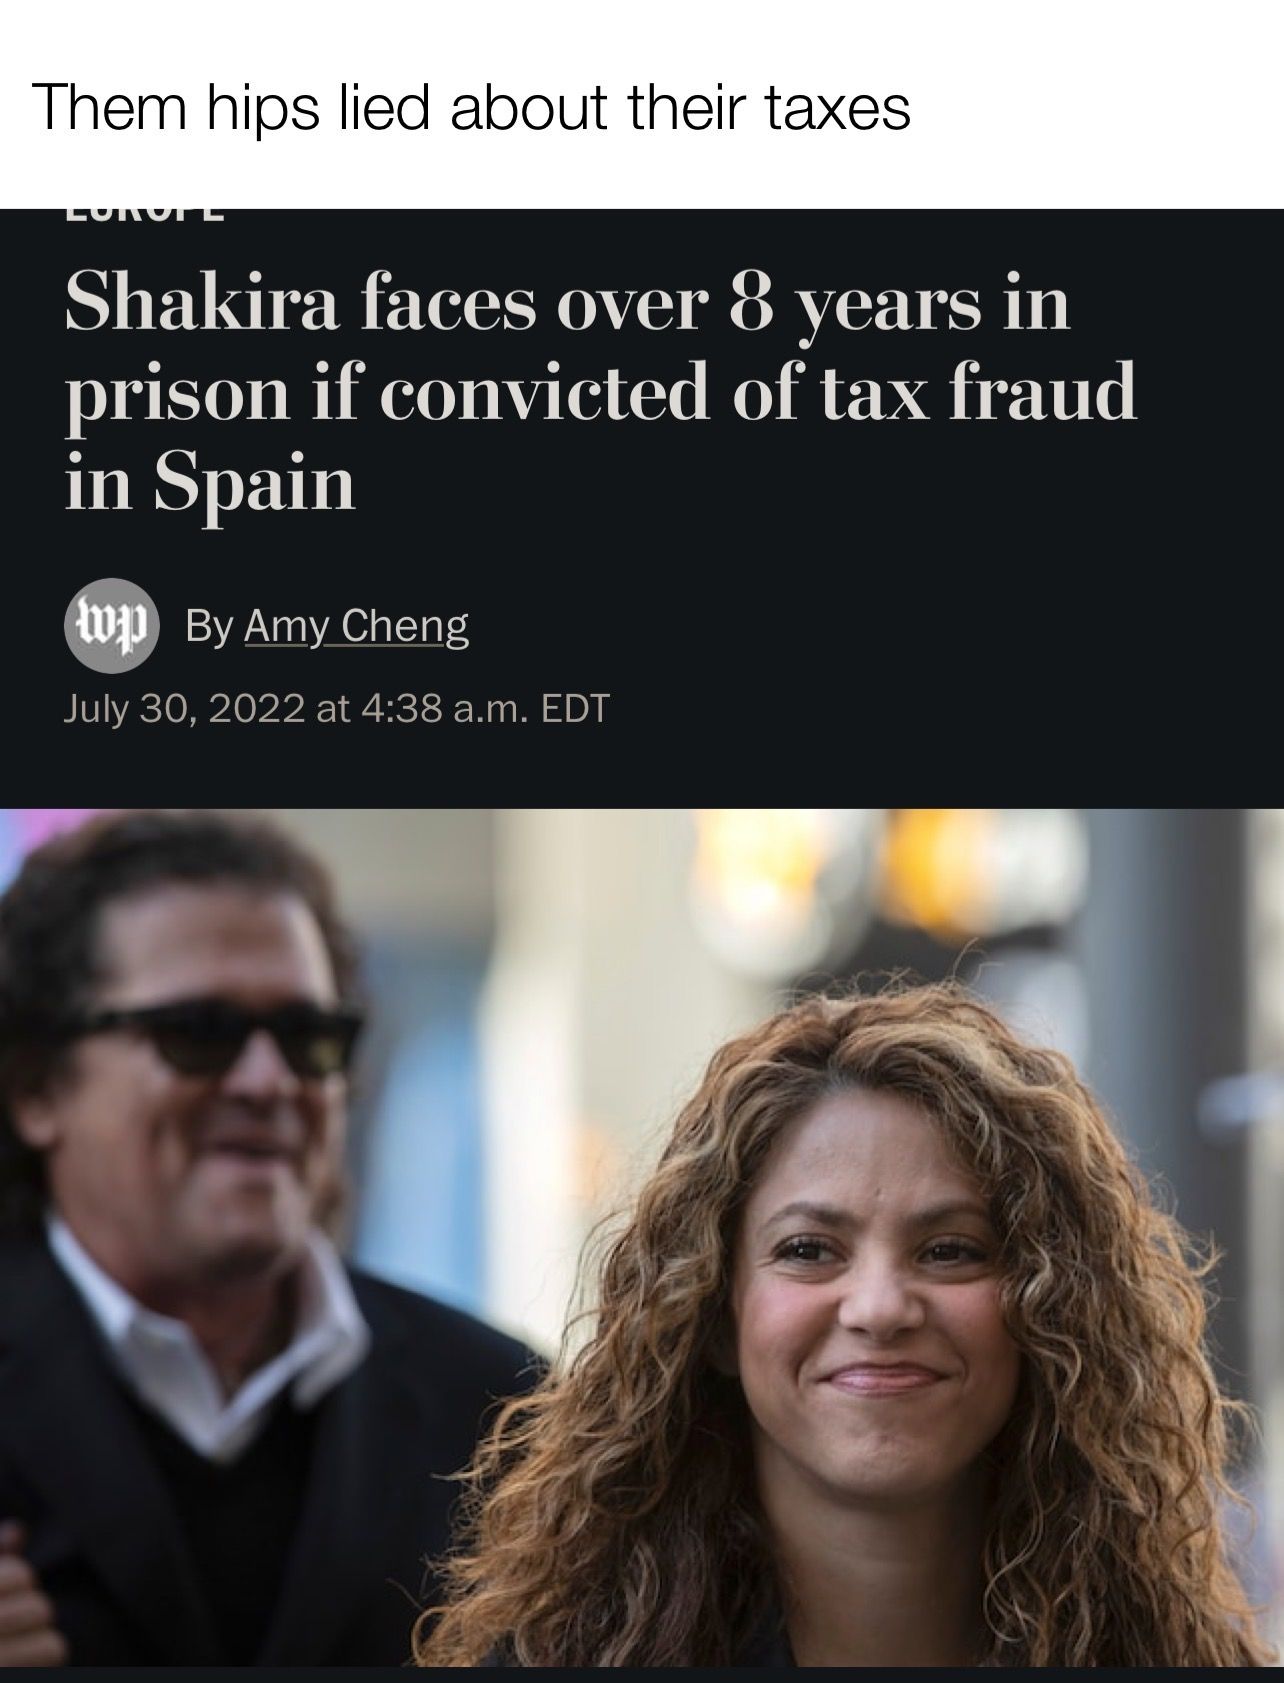 Nobody knew she could dodge taxes like that